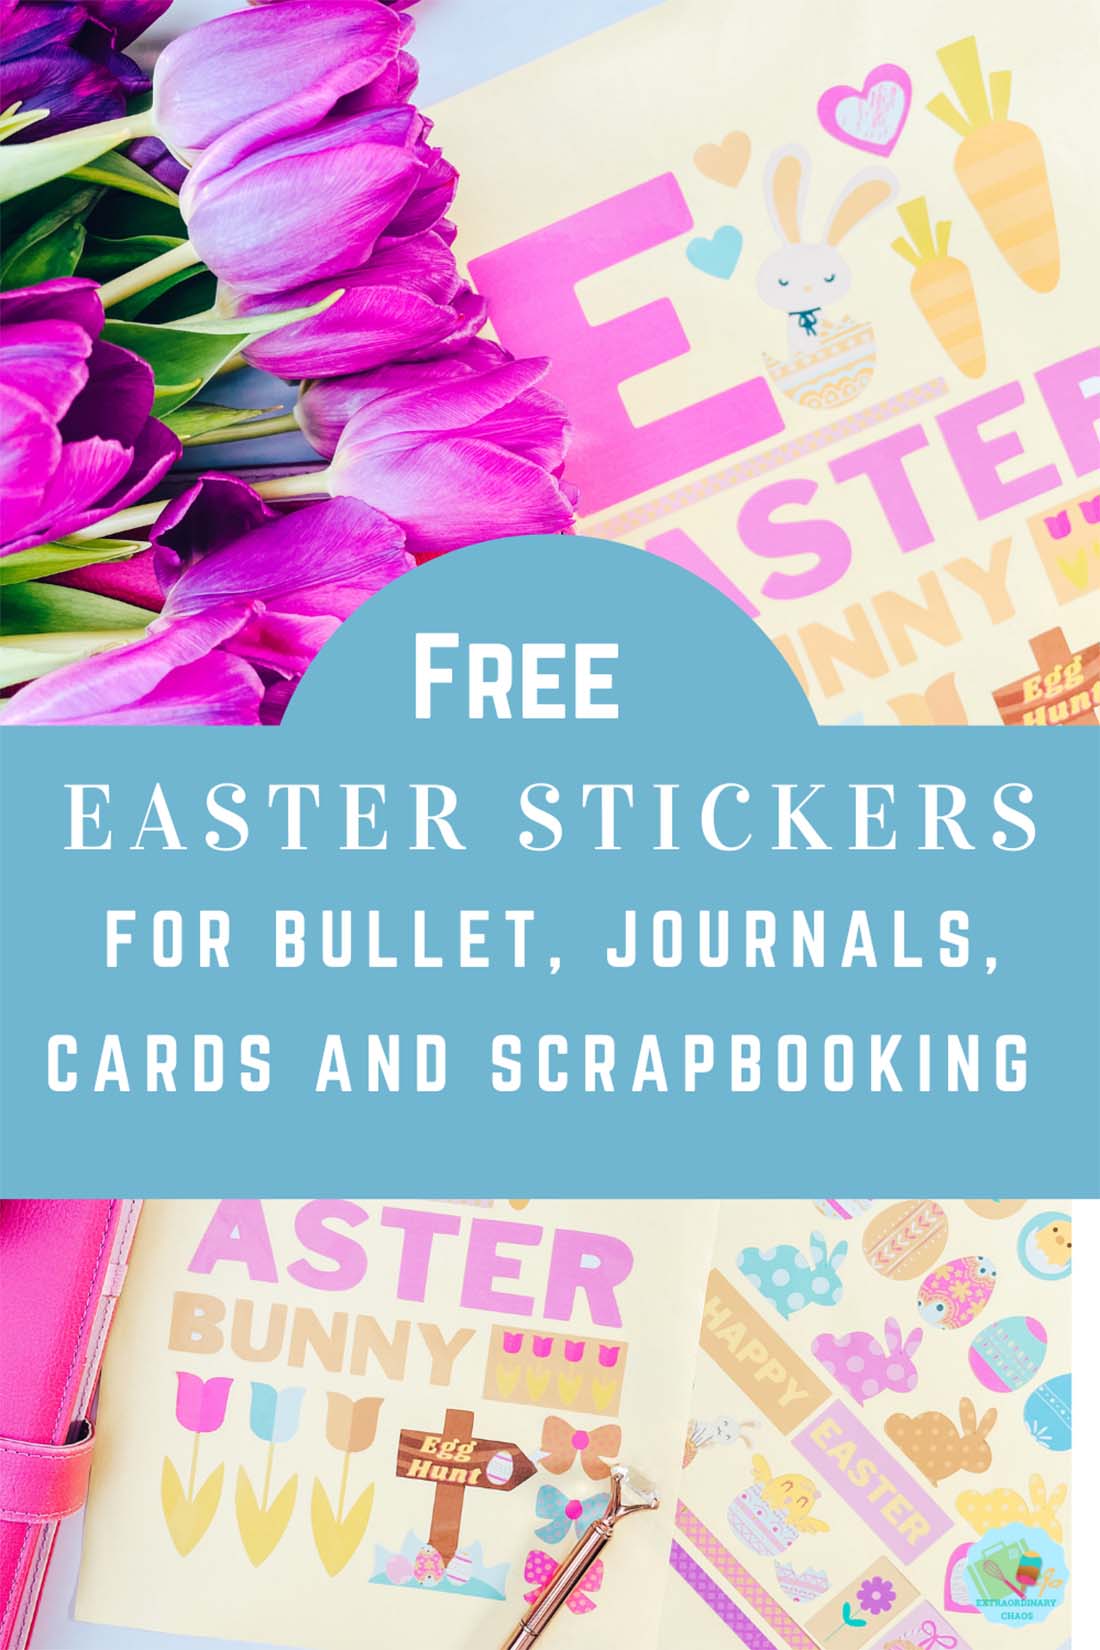 Free Easter printable stickers for Cricut Print and cut or to cut out by hand fro cards, planners scrapbooking and bullet journals